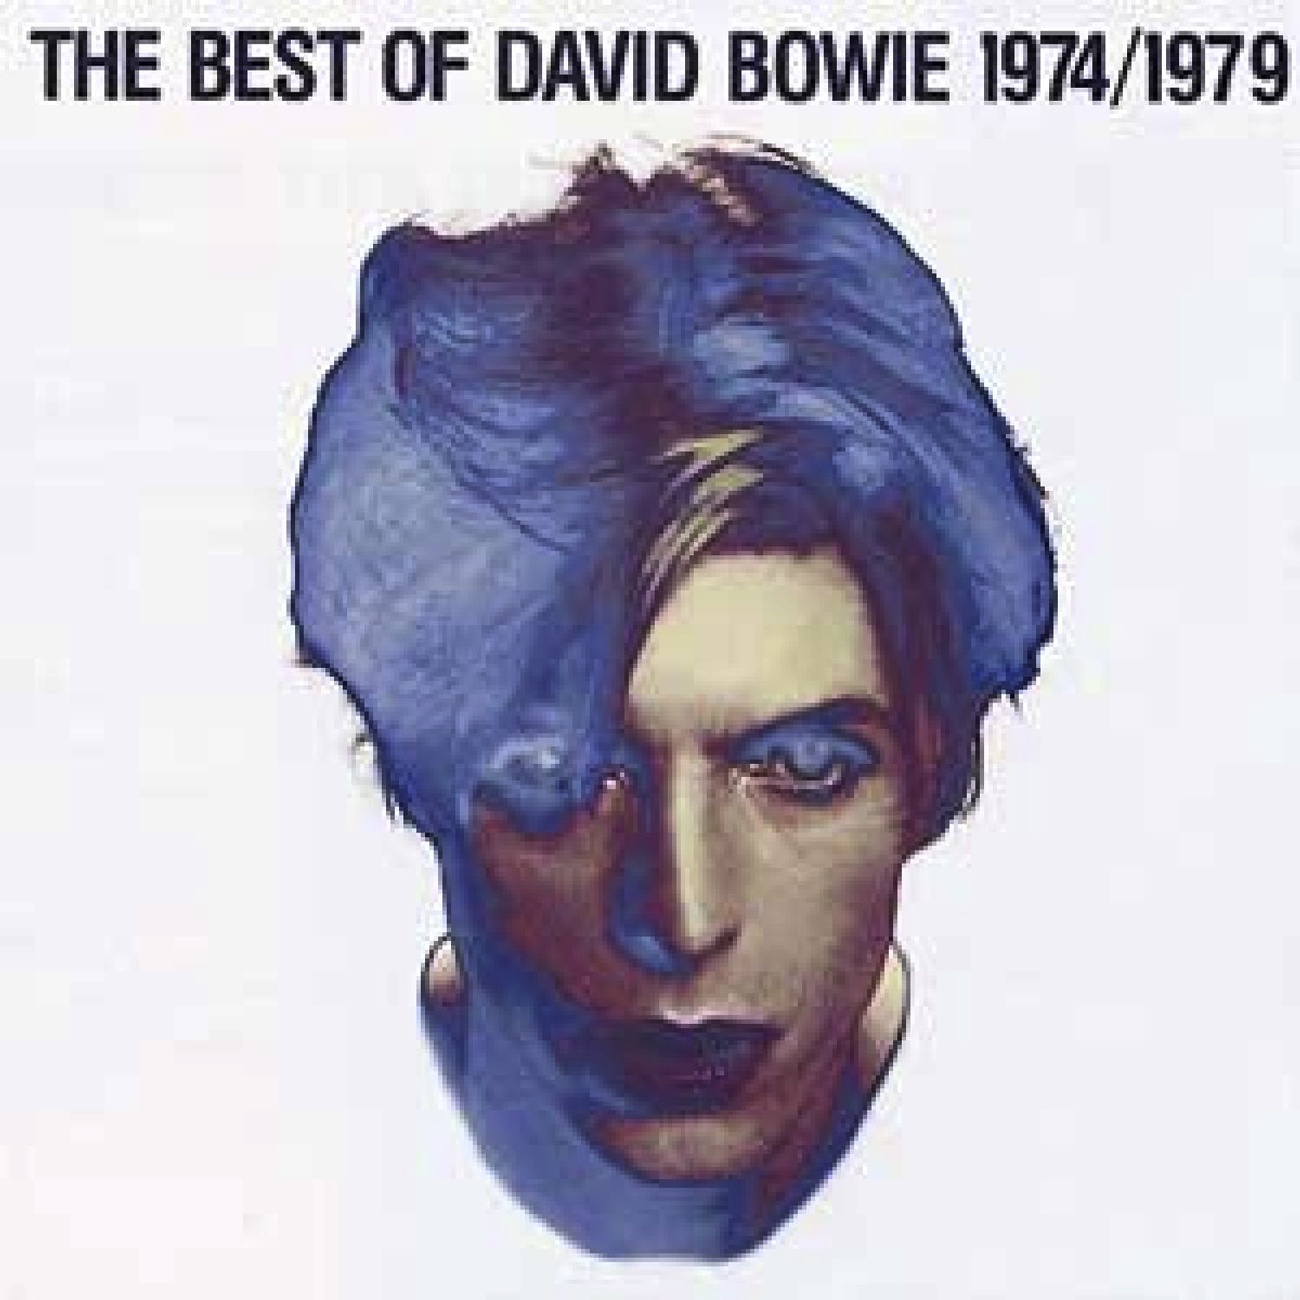 The Best Of David Bowie 1974-79